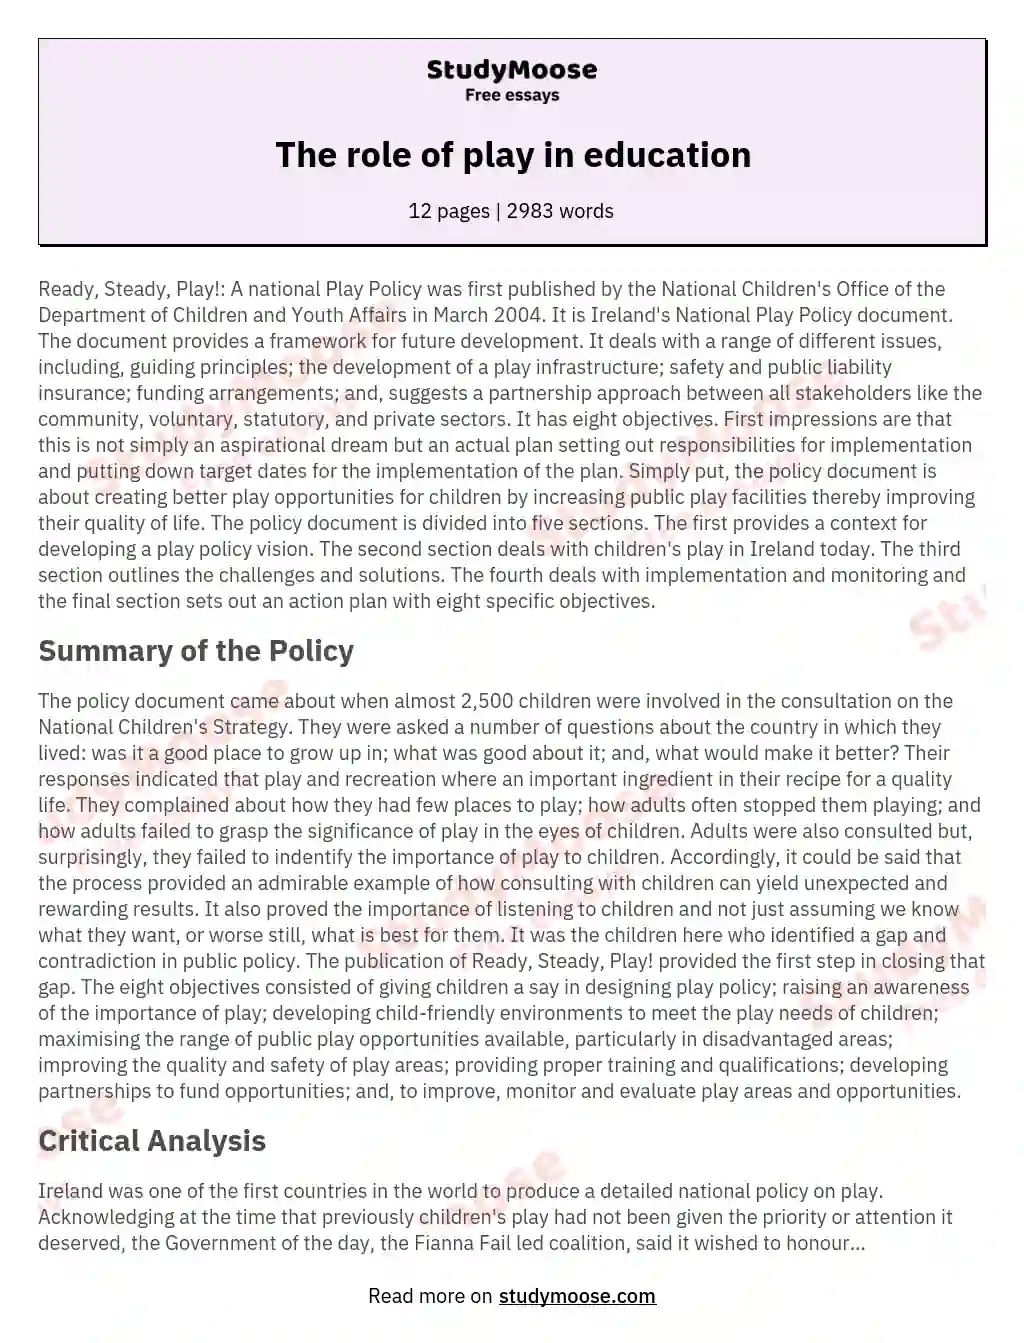 The role of play in education essay